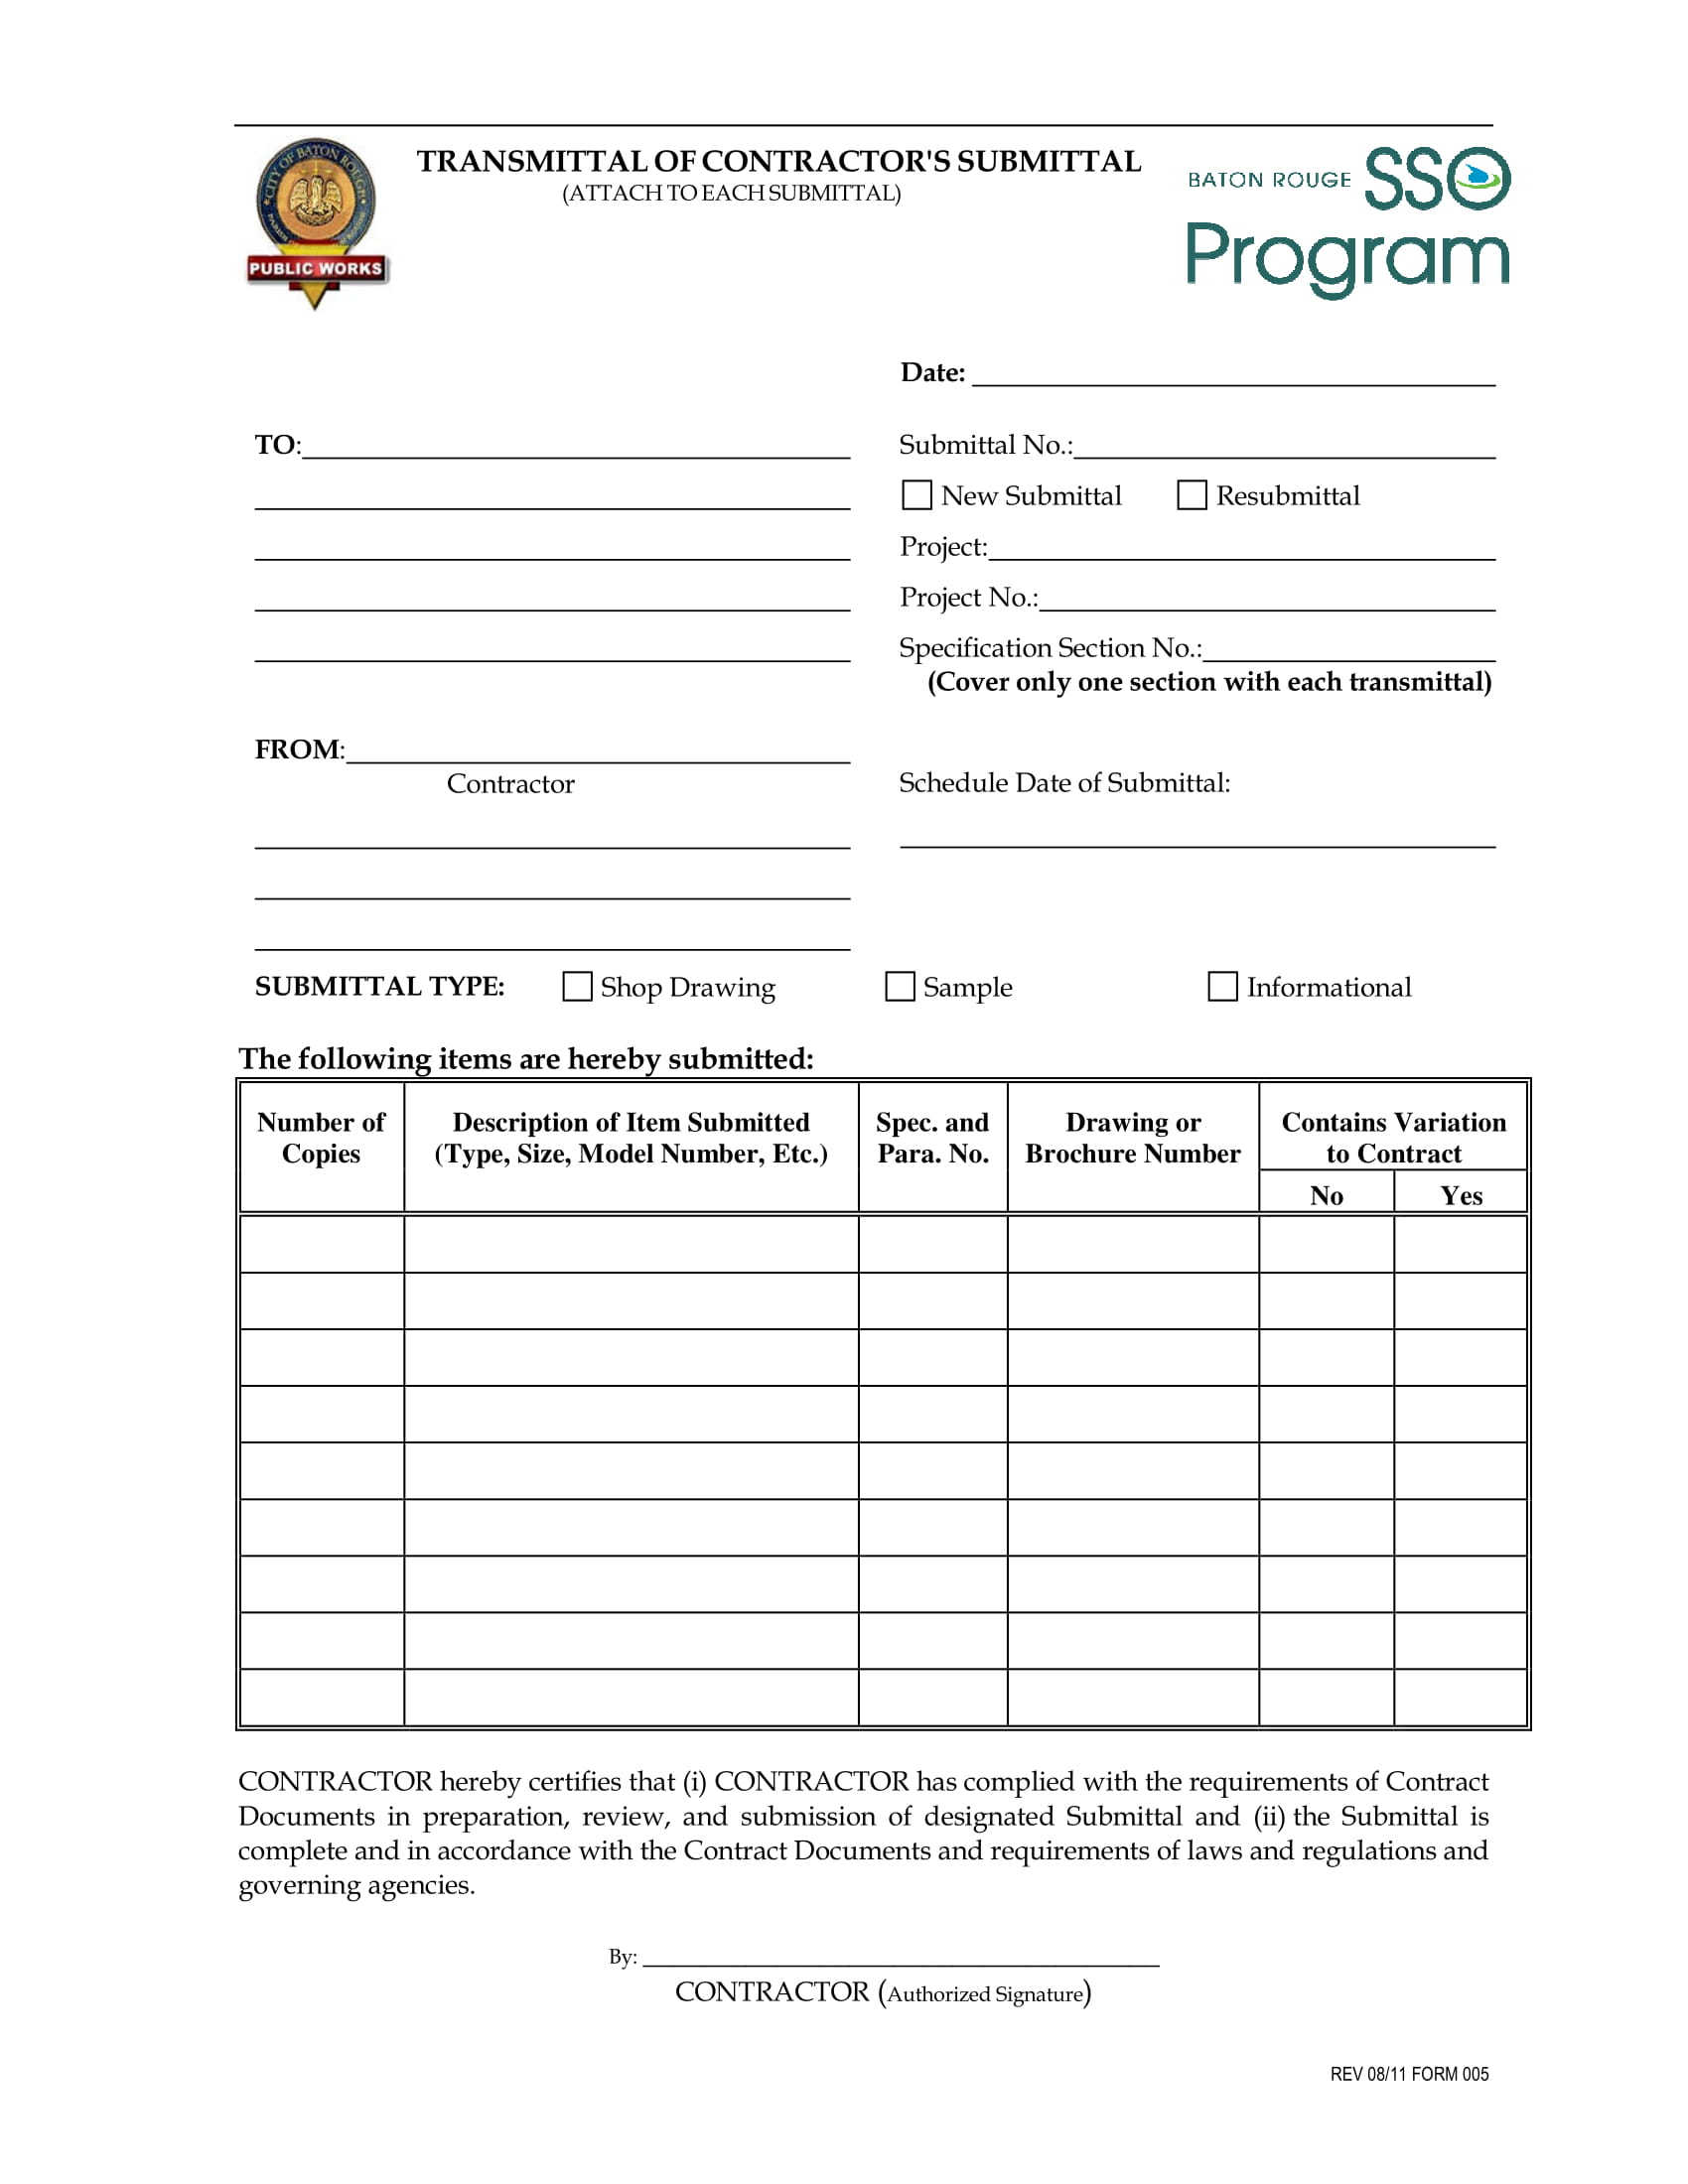 construction contractor transmittal form 1